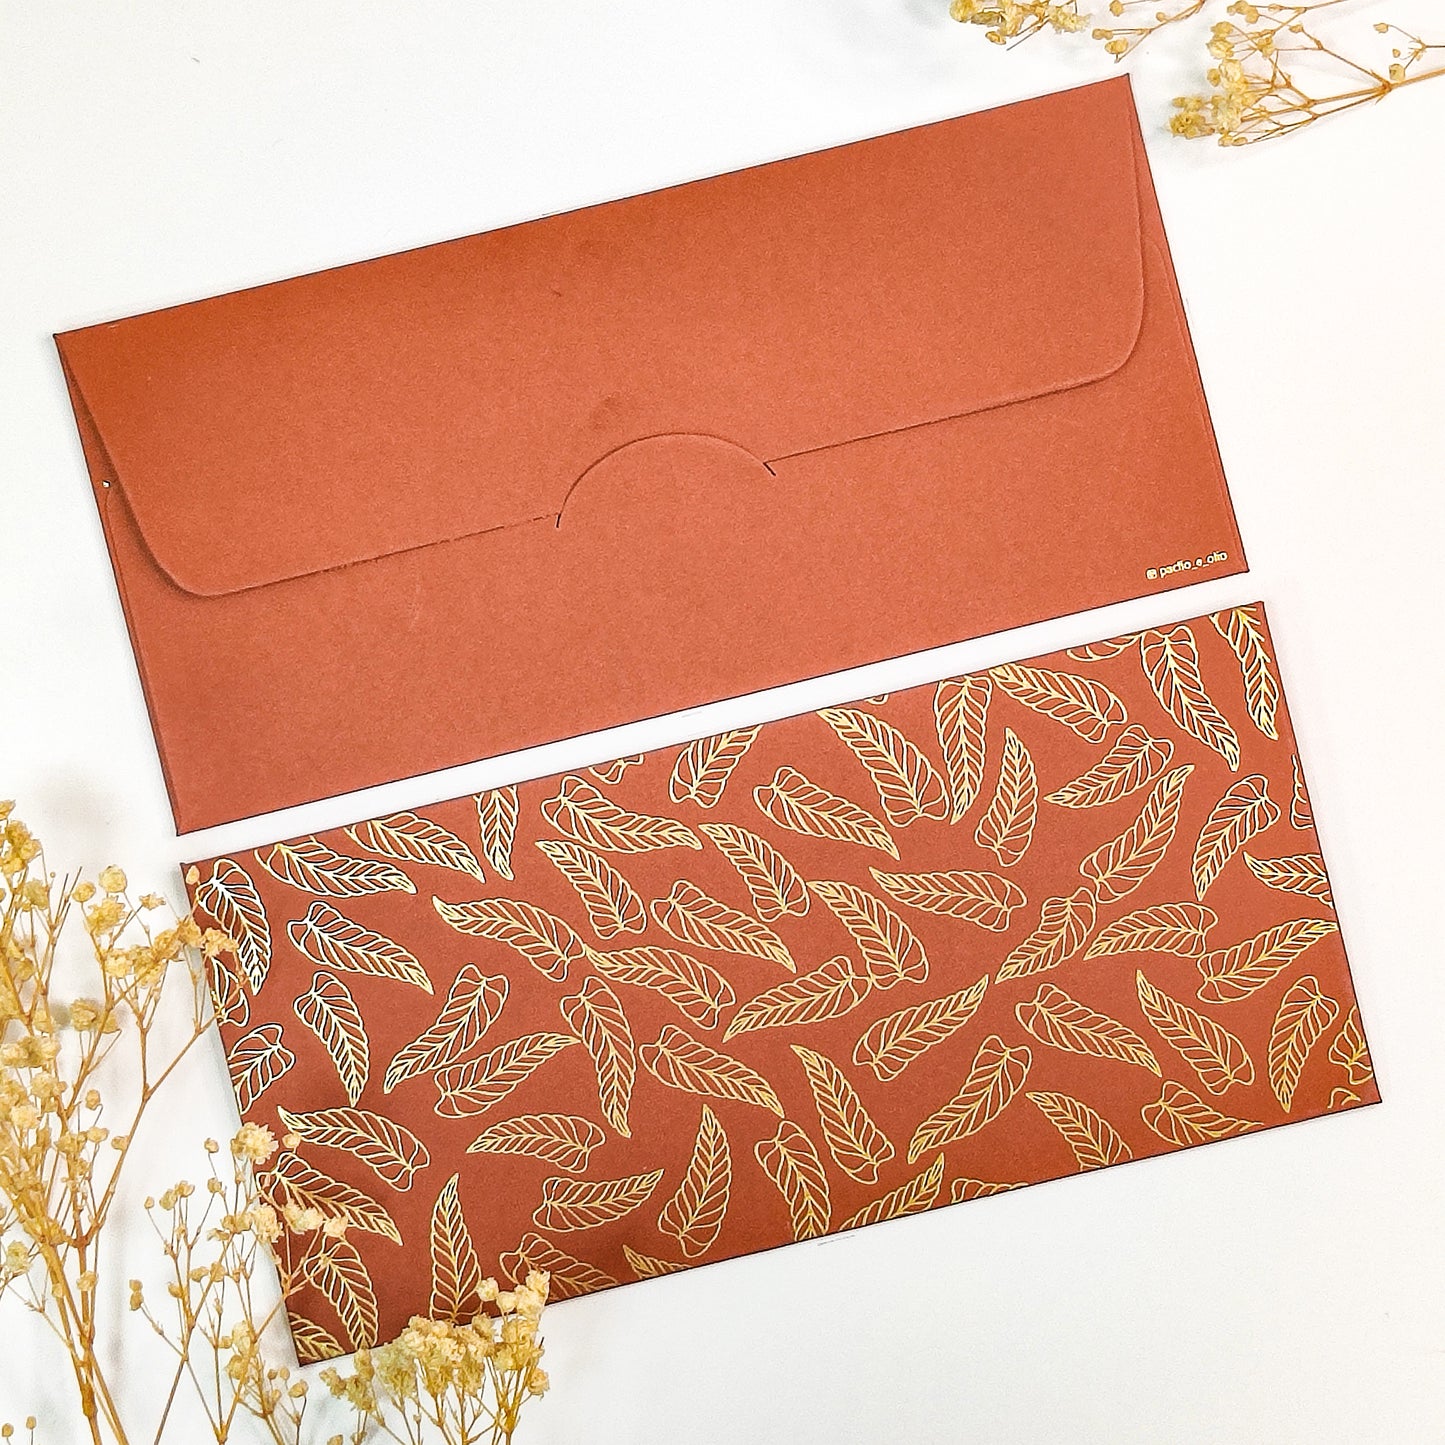 LEAF PATTERN ENVELOPE (7.5X3.5 INCHES)